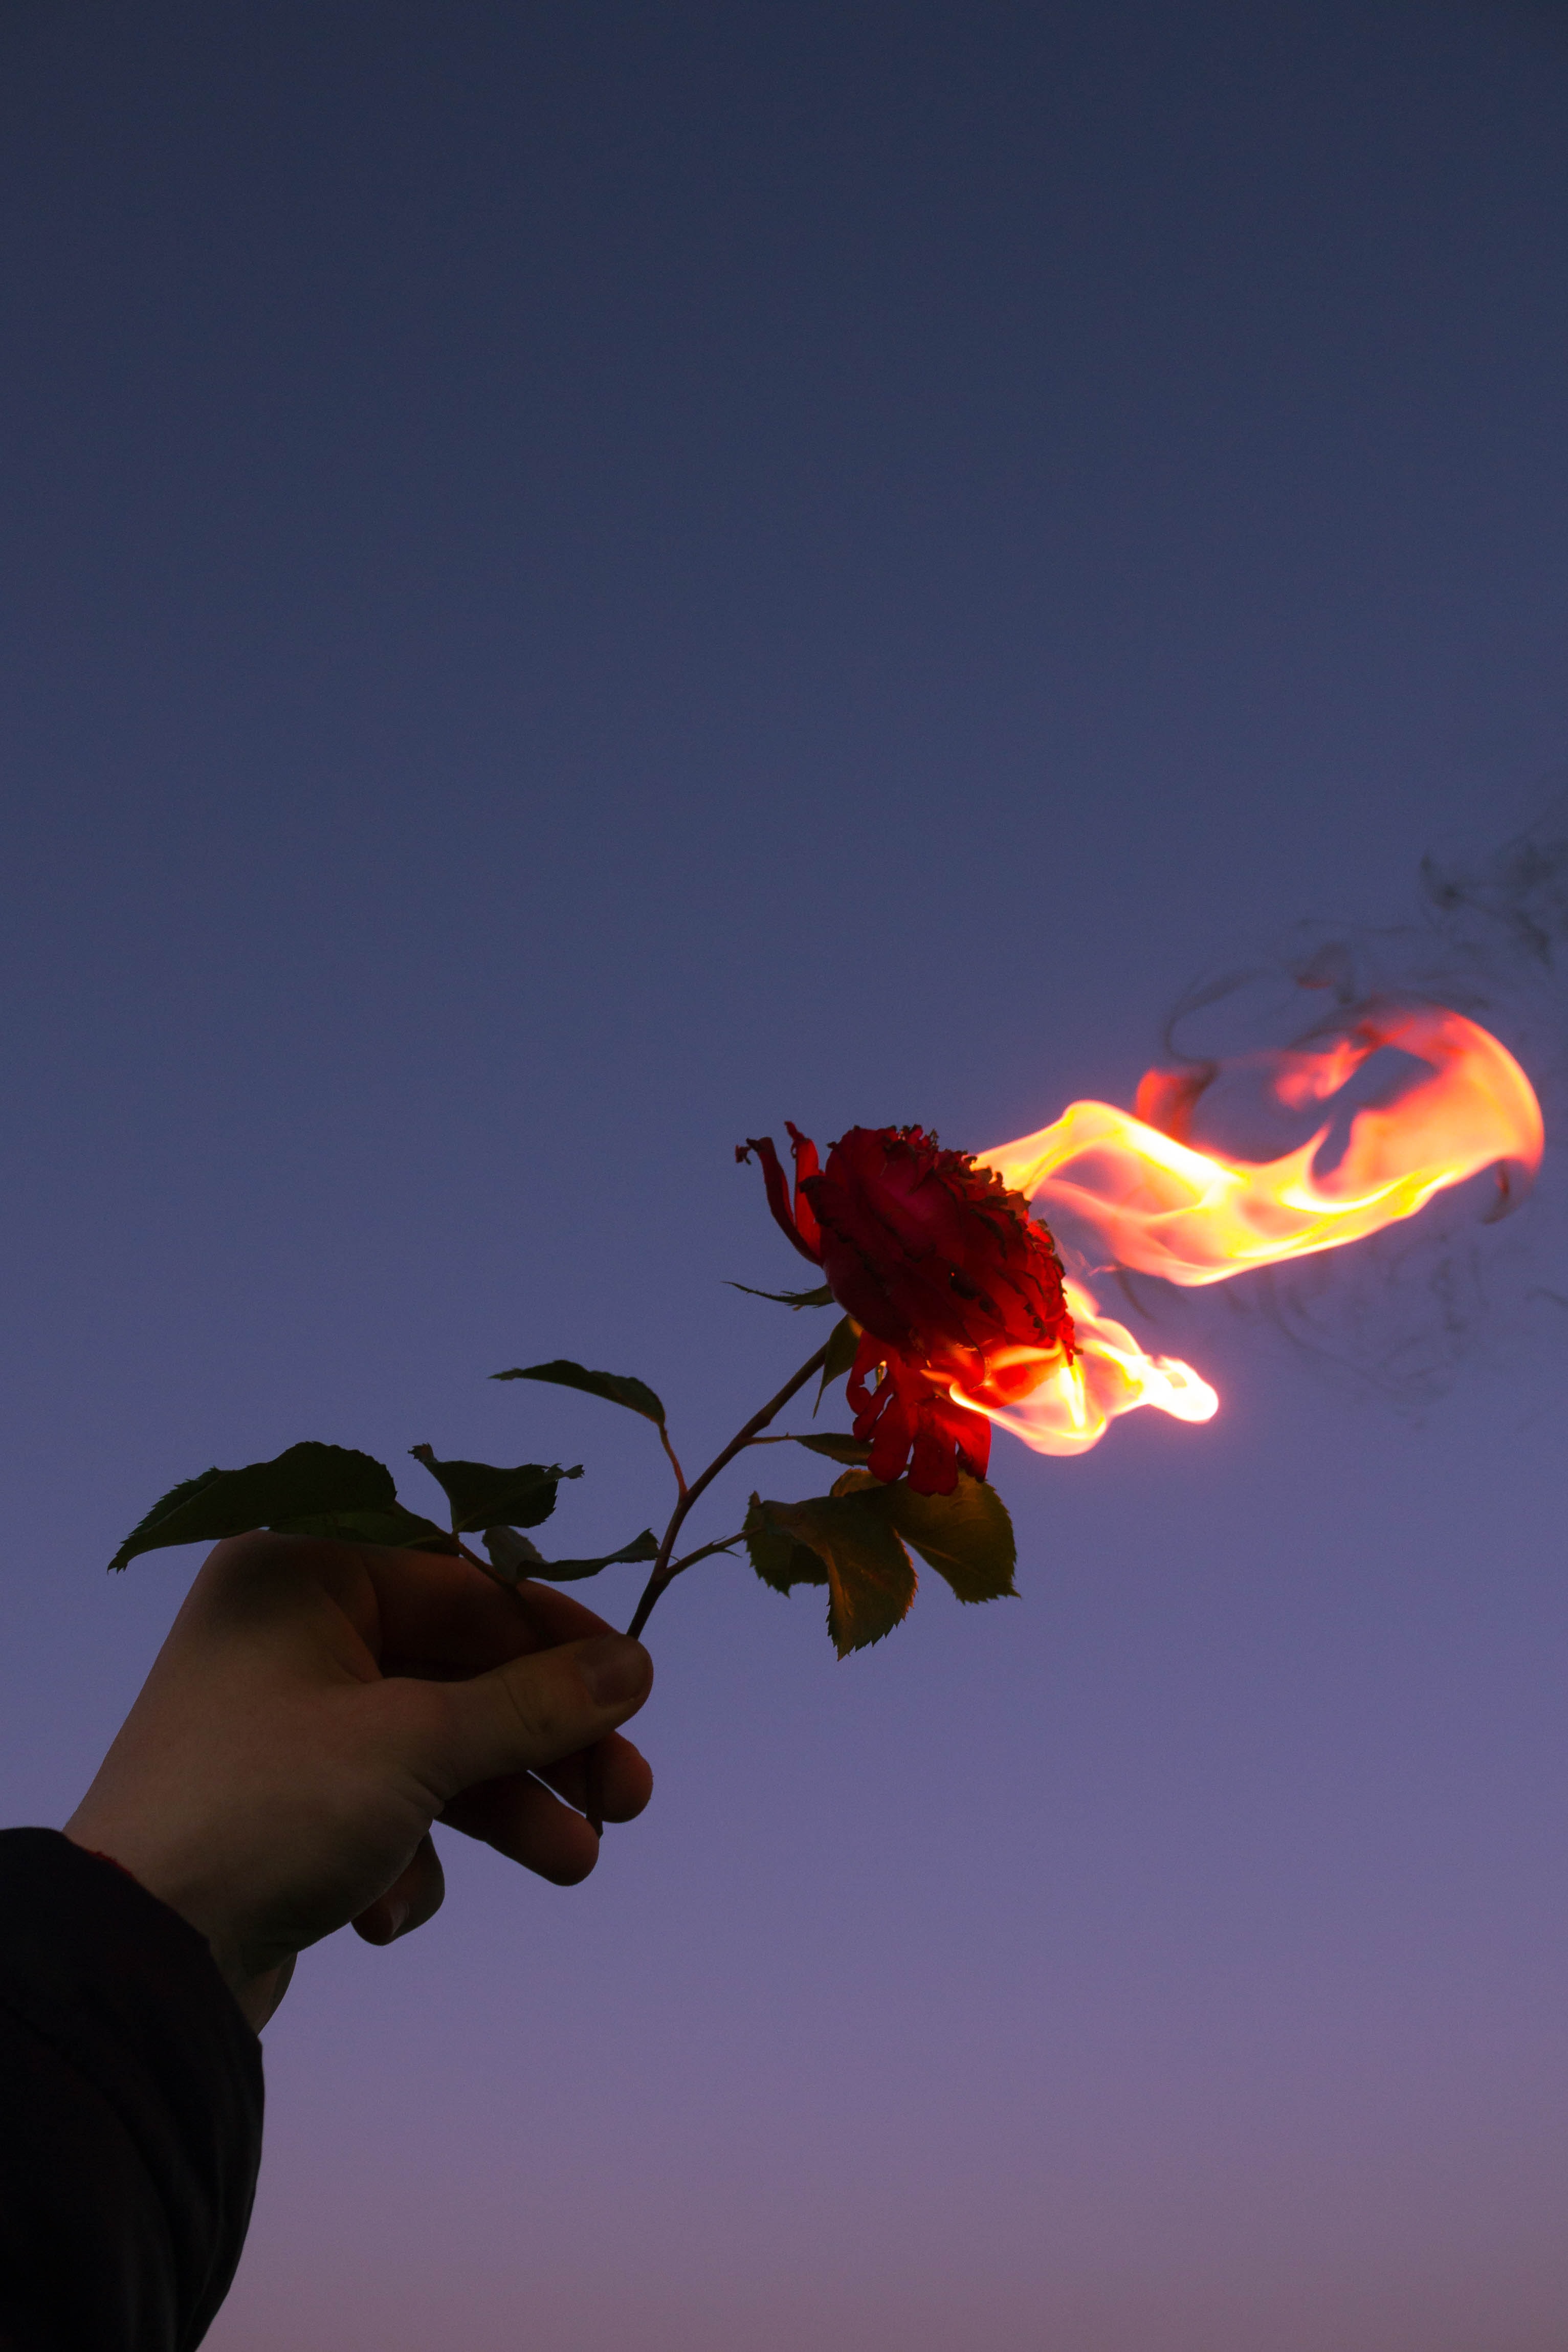 rose, hand, fire, flower, flame, miscellanea, miscellaneous, rose flower 2160p